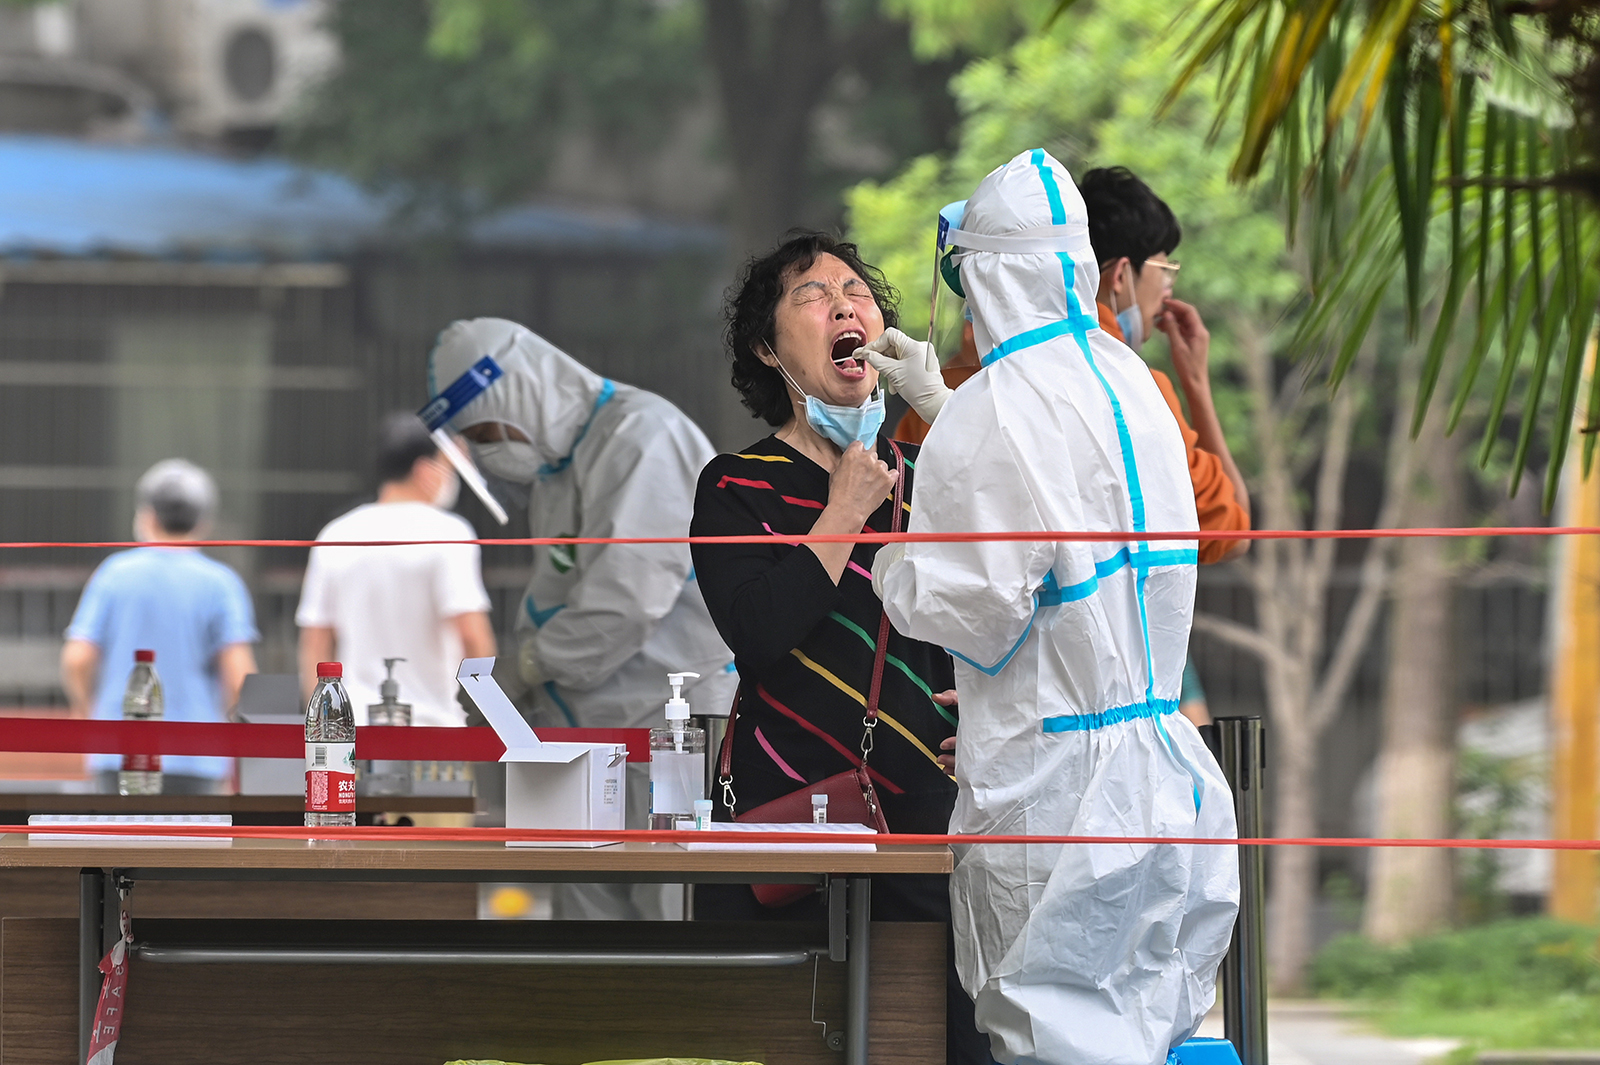 A medical worker takes a swab sample from a woman to be tested for Covid-19 in Wuhan, China on May 15.